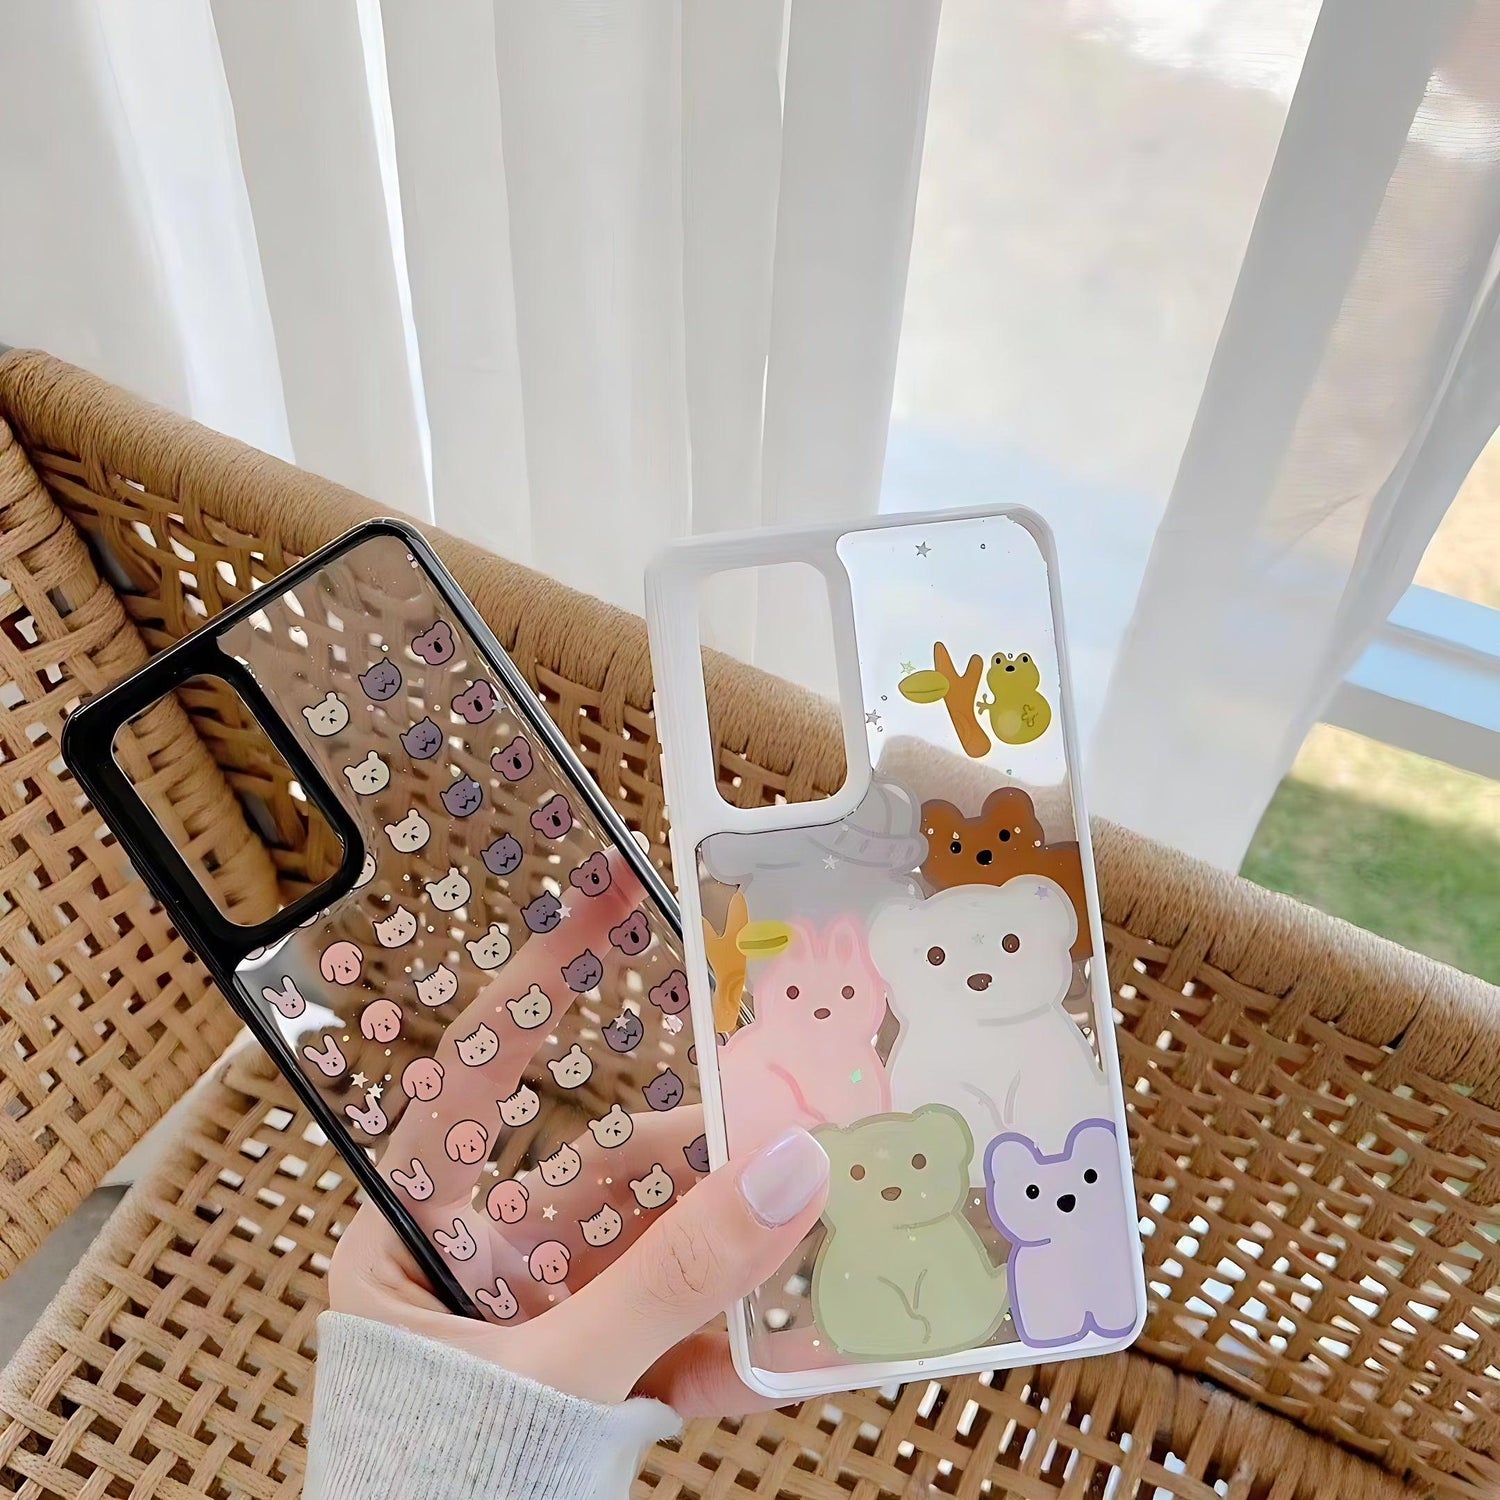 Huawei P20 Cute Phone Cases - Touchy Style .